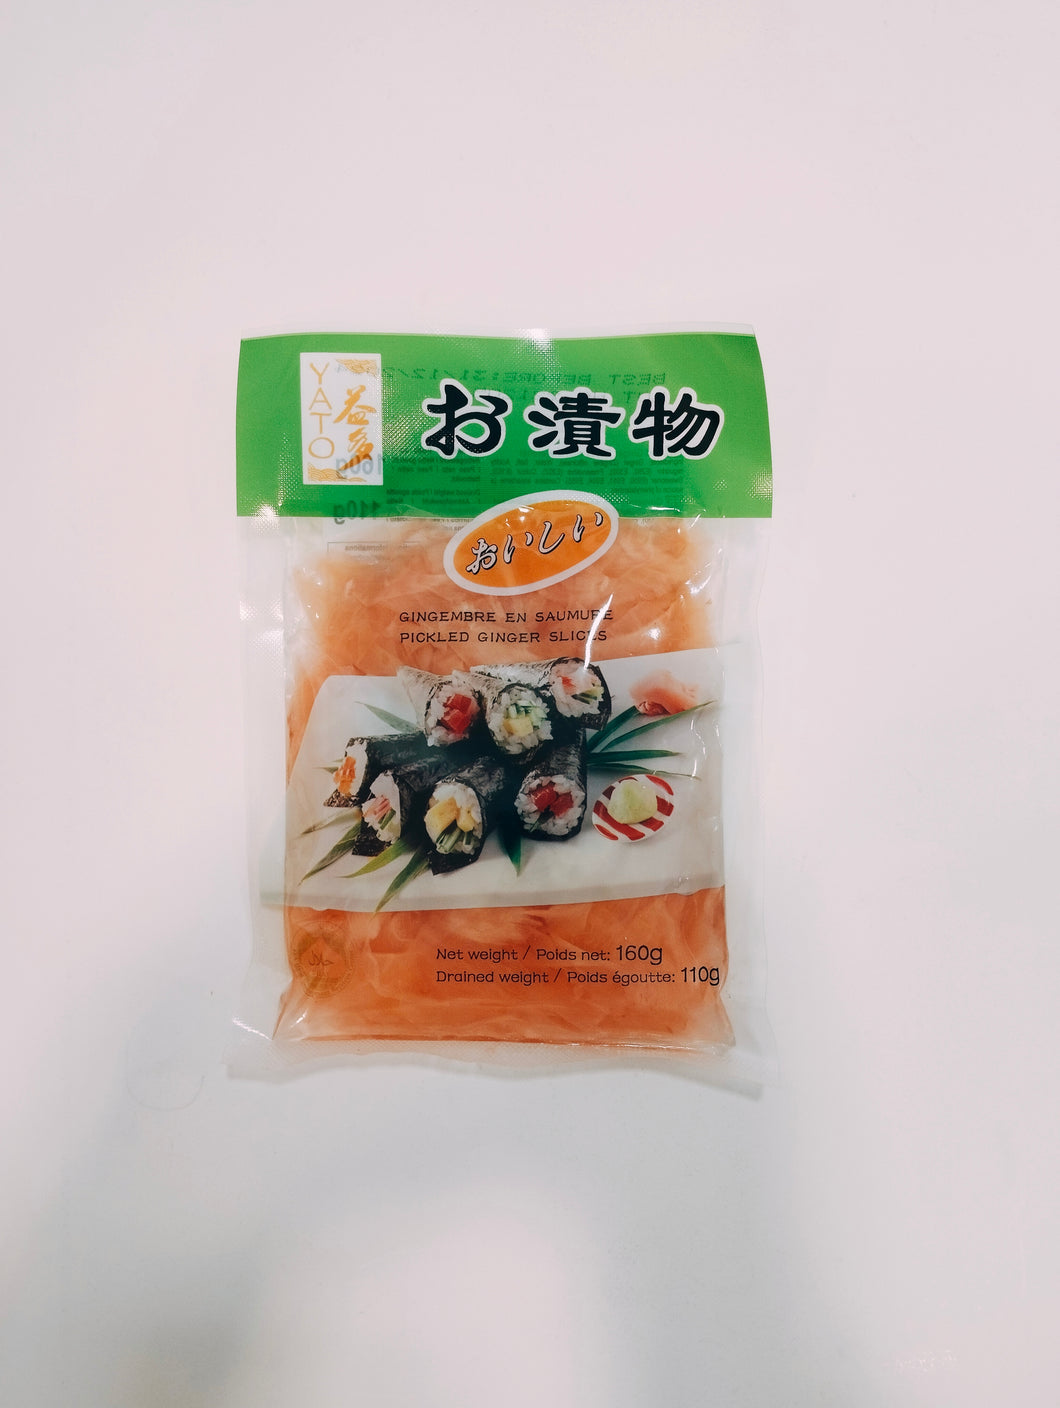 (Yato) pickled ginger slices 생강 초 절임 160g